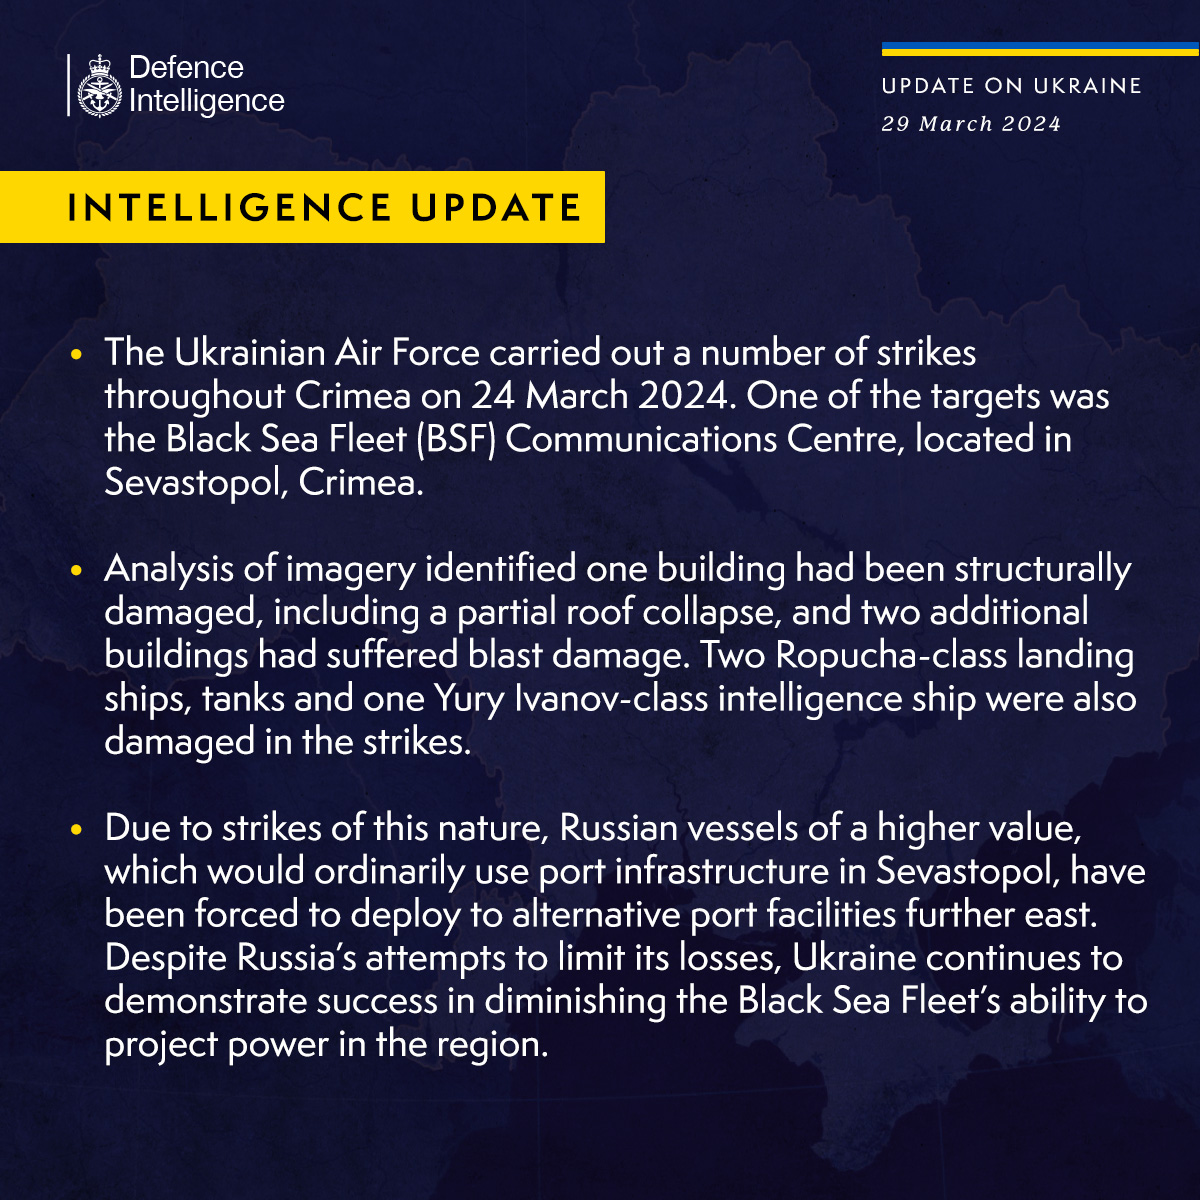 The Ukrainian Air Force carried out a number of strikes throughout Crimea on 24 March 2024. One of the targets was the Black Sea Fleet (BSF) Communications Centre, located in Sevastopol, Crimea. Analysis of imagery identified one building had been structurally damaged, including a partial roof collapse, and two additional buildings had suffered blast damage. Two Ropucha-class landing ships, tanks and one Yury Ivanov-class intelligence ship were also damaged in the strikes. Due to strikes of this nature, Russian vessels of a higher value, which would ordinarily use port infrastructure in Sevastopol, have been forced to deploy to alternative port facilities further east. Despite Russia’s attempts to limit its losses, Ukraine continues to demonstrate success in diminishing the Black Sea Fleet’s ability to project power in the region.